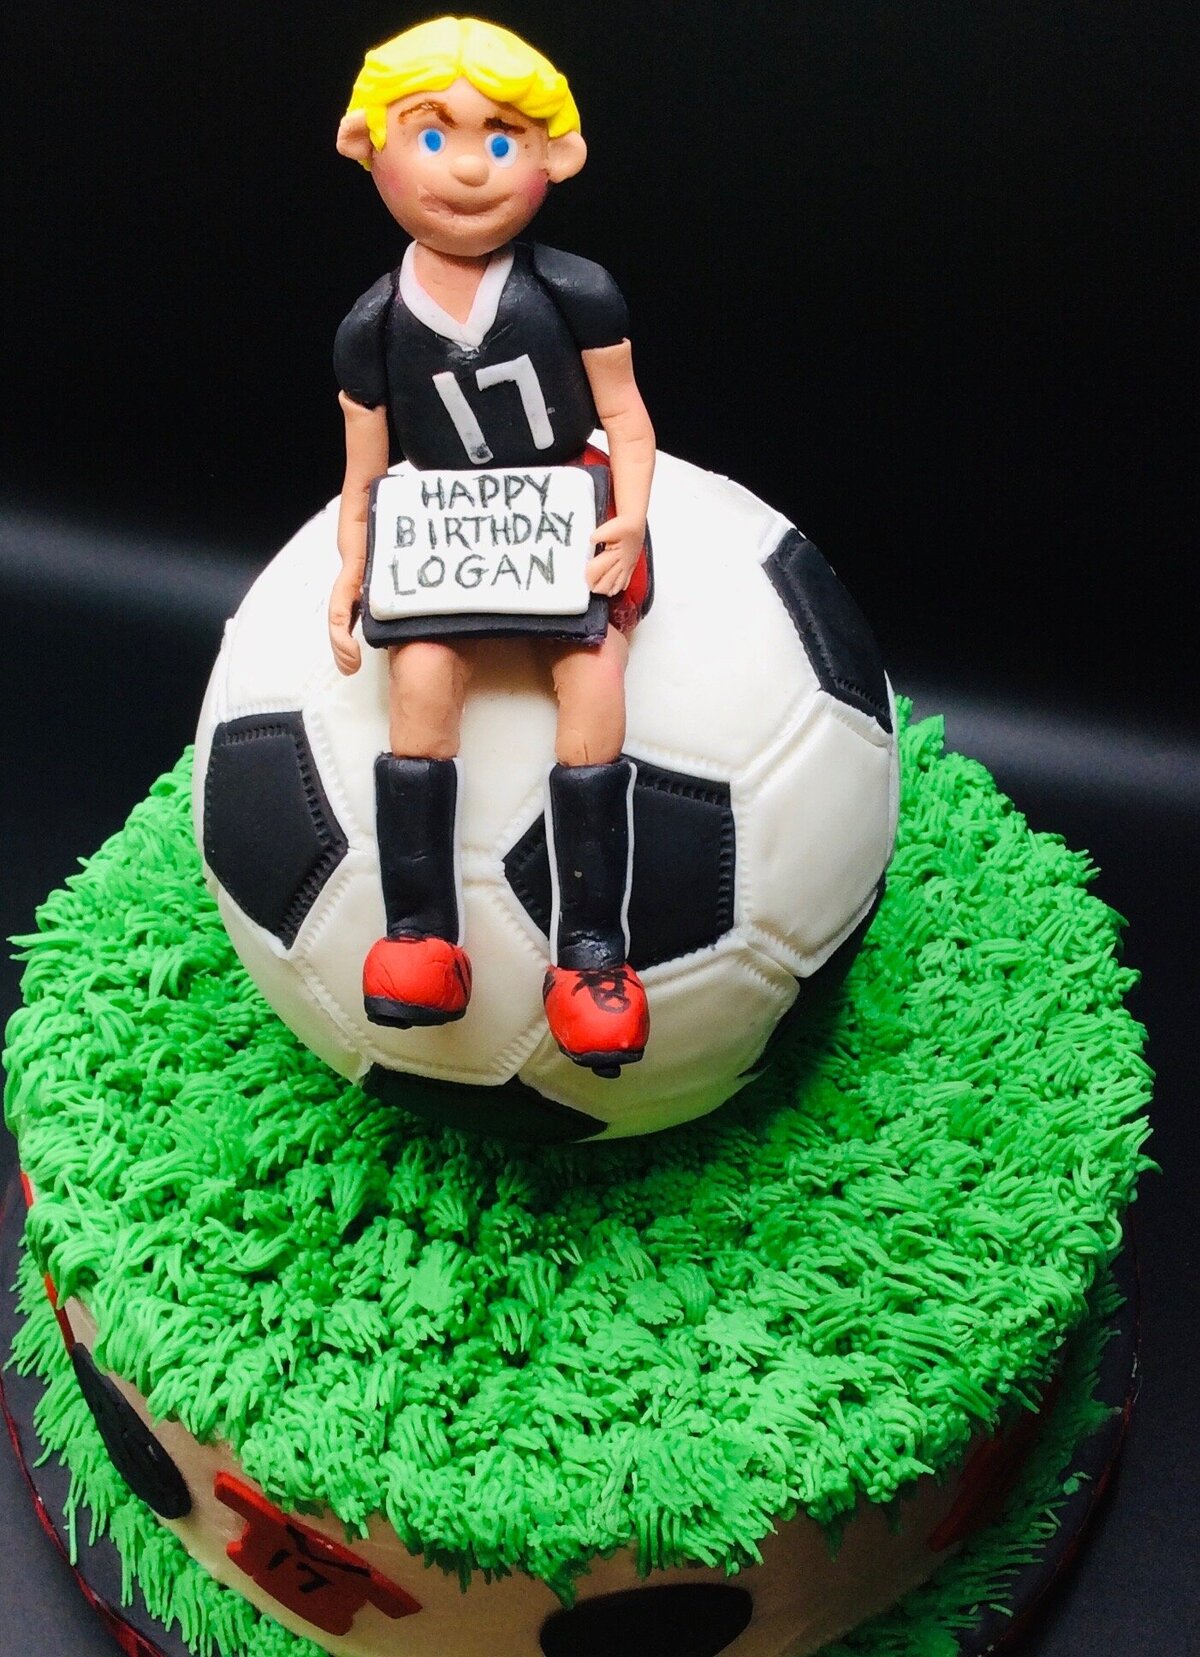 2 tier cake decorated with grass, and soccer shirts. Top tier is a round soccer ball with a soccer player sitting on top of it